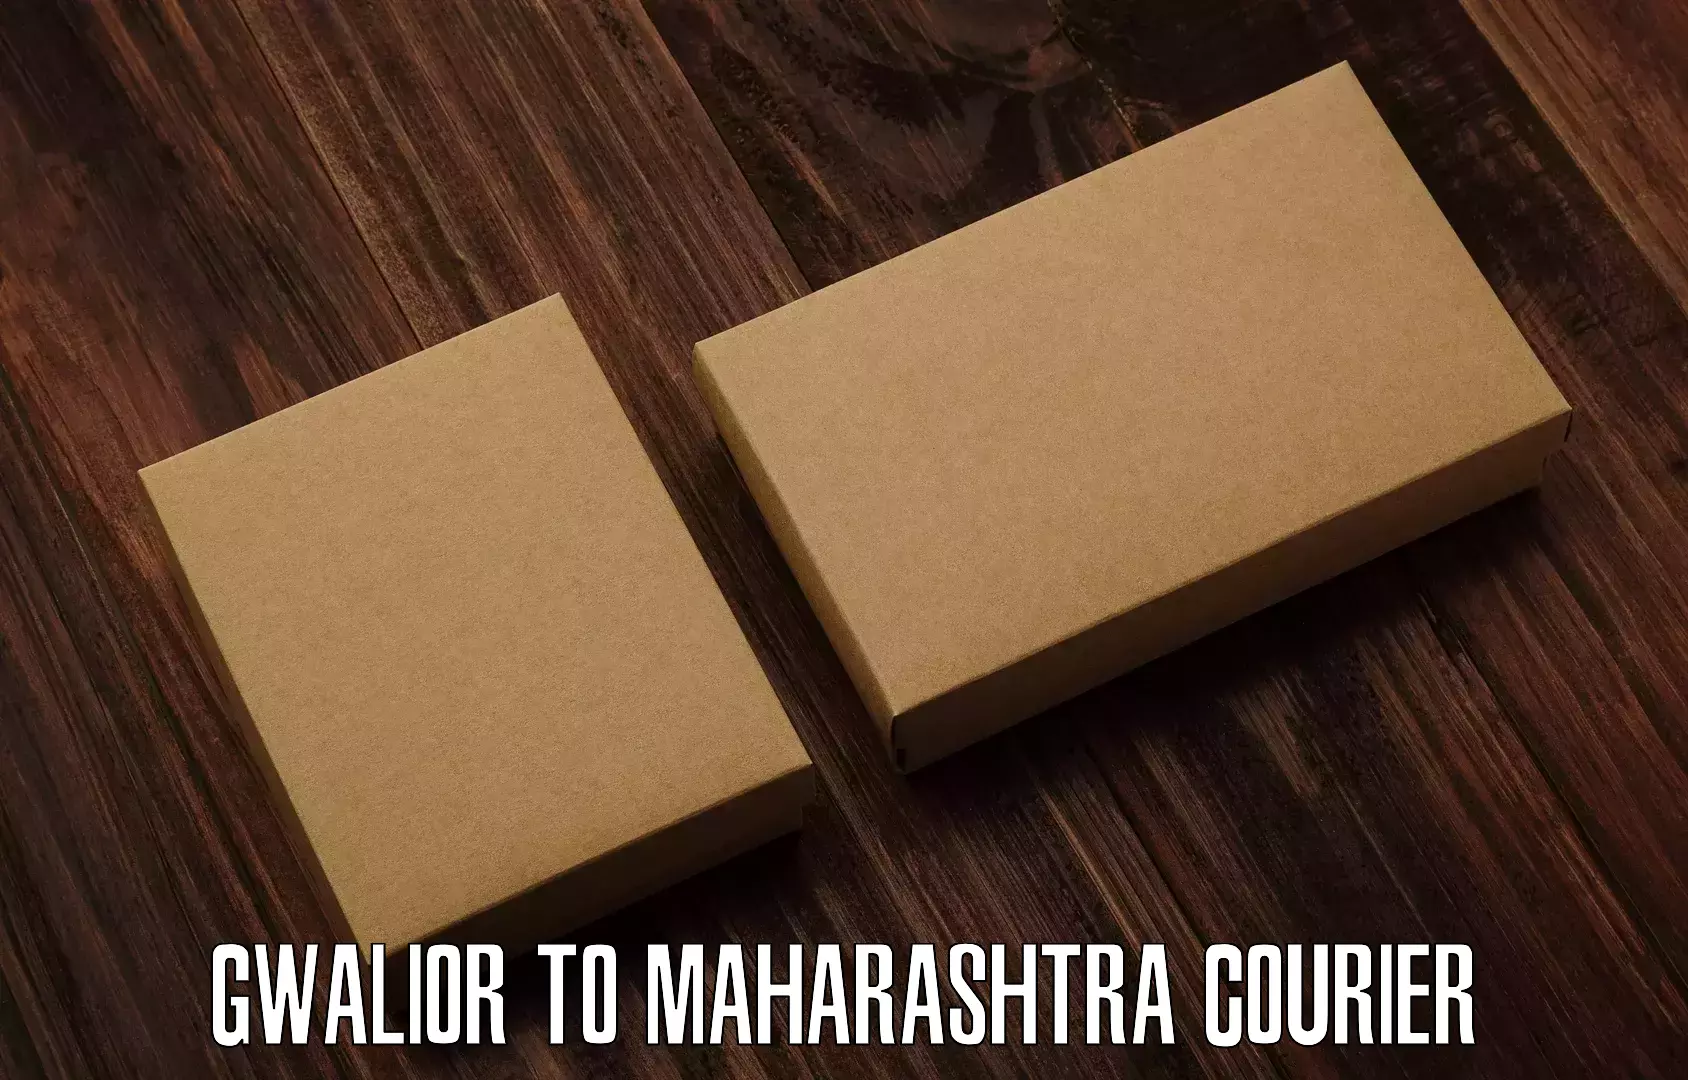 Courier service partnerships in Gwalior to Jalna